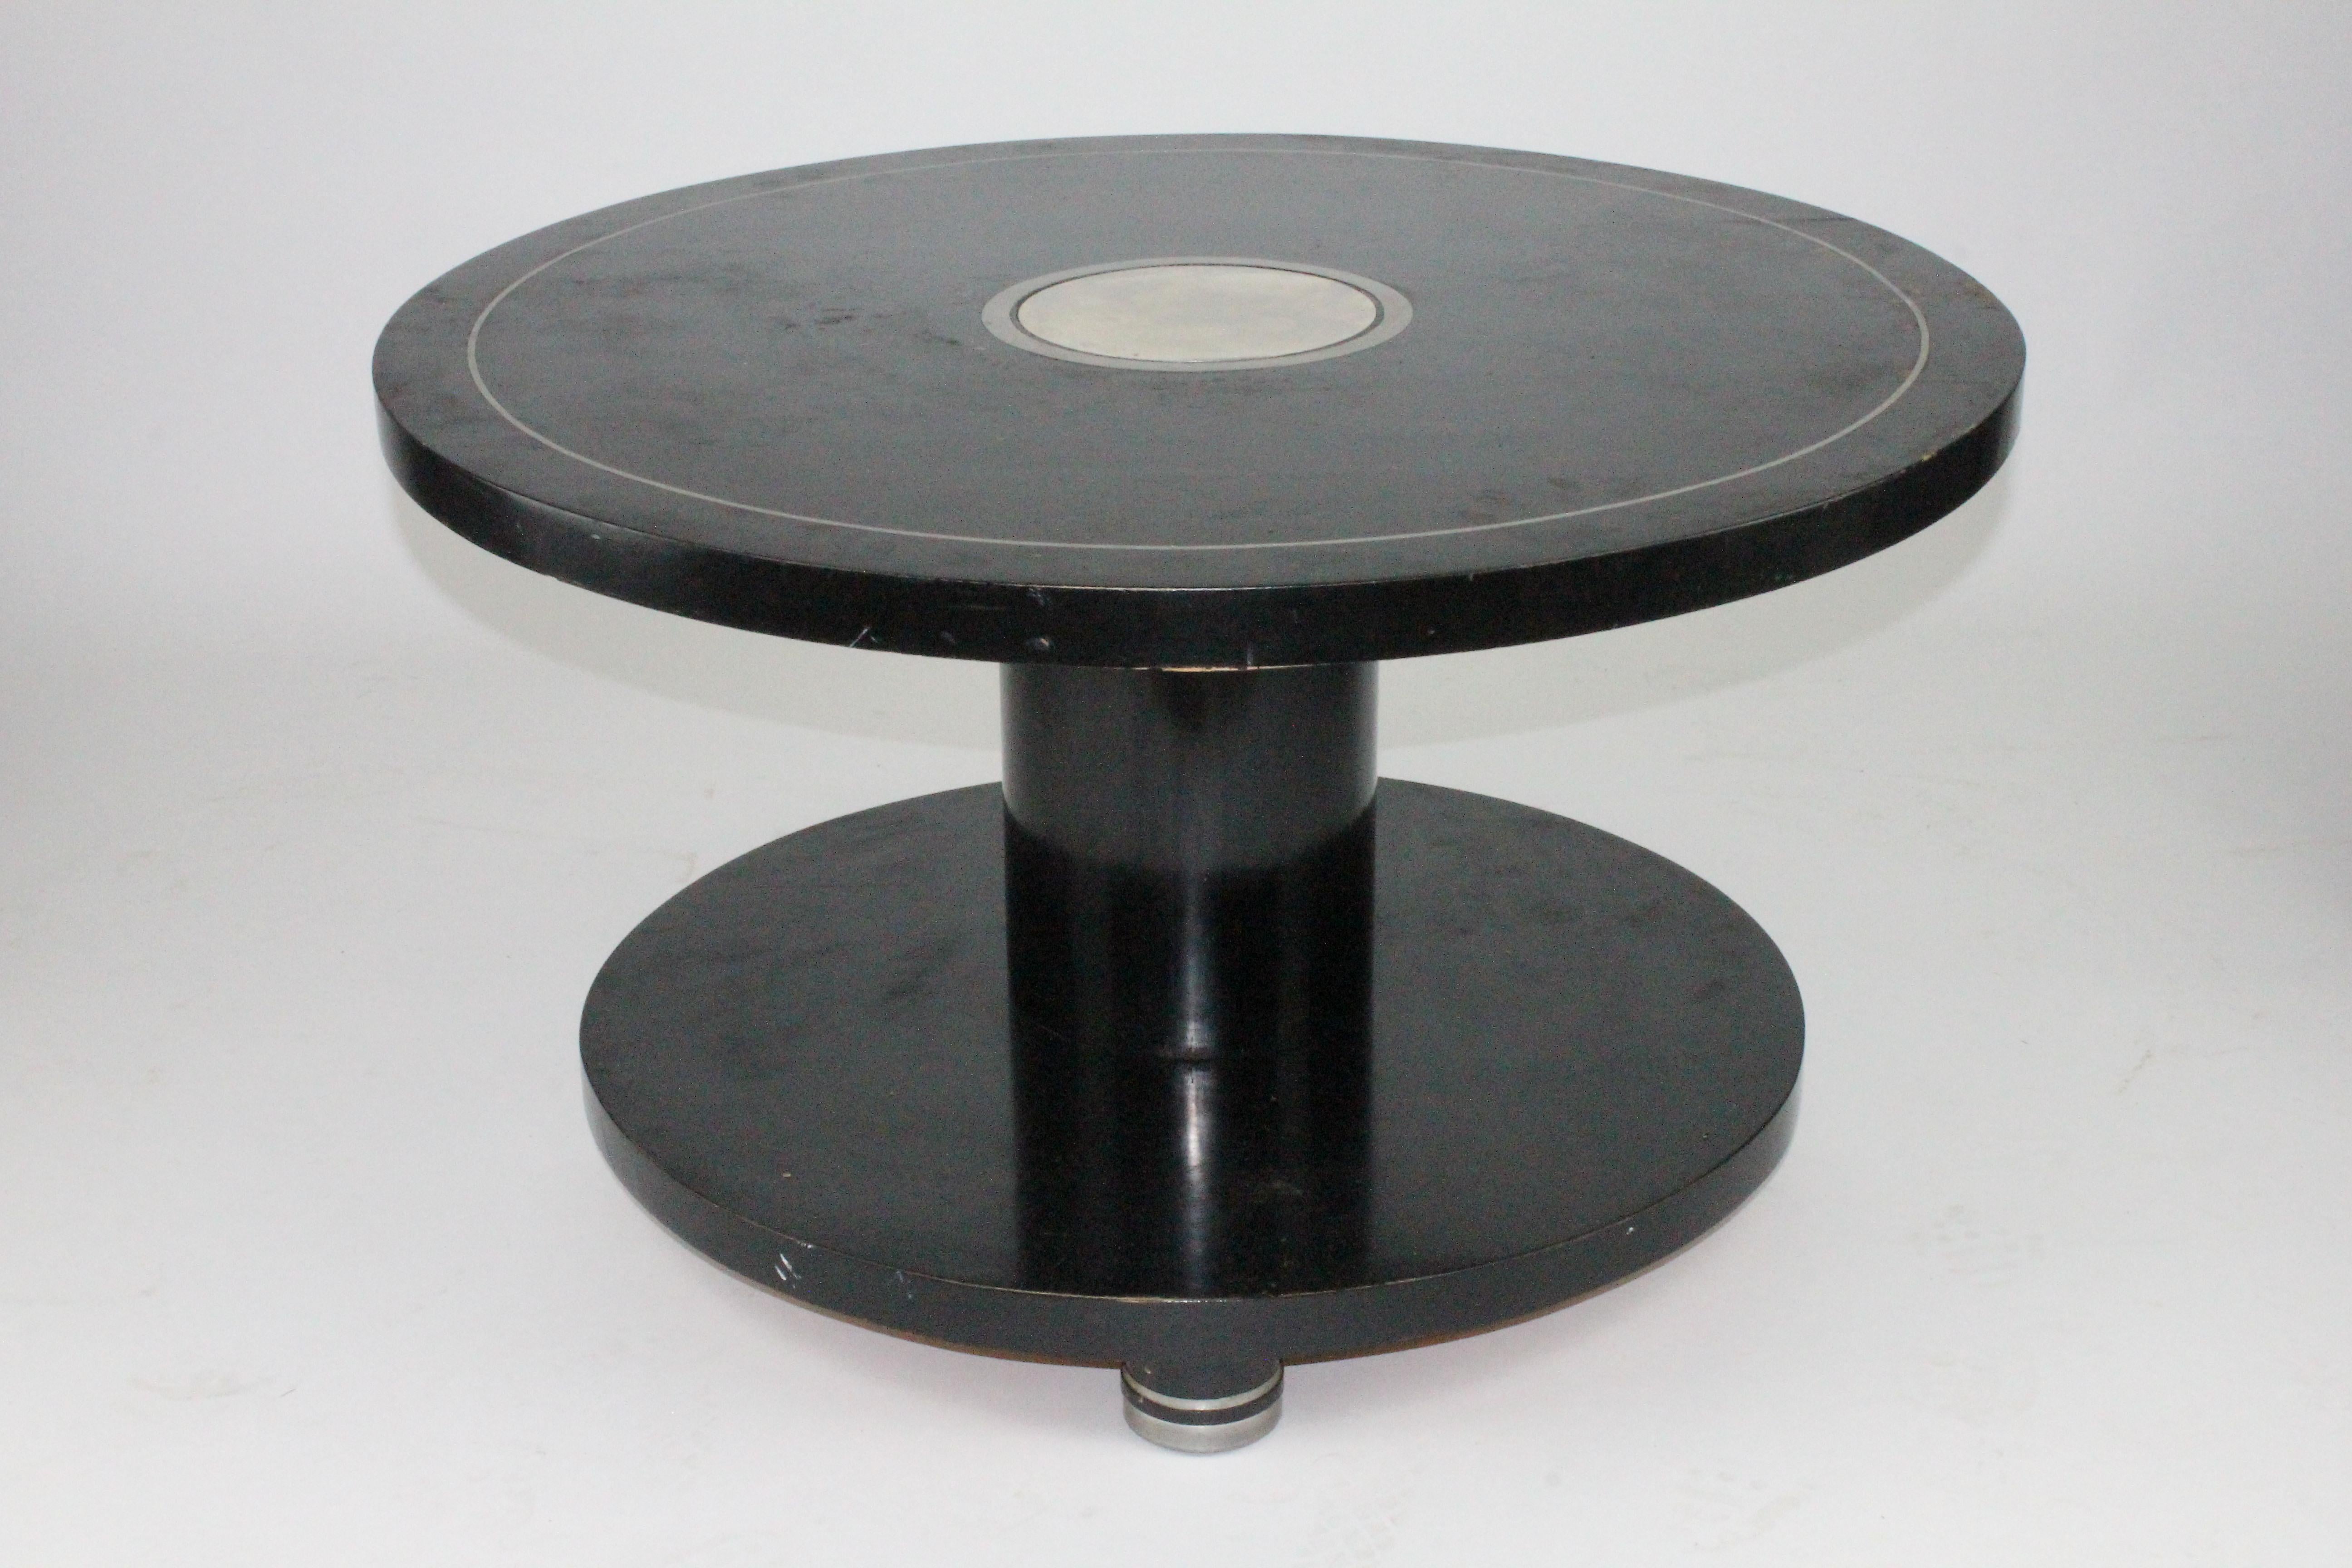 Alvar Andersson Table, 1933, Swedish, Black Painted with Pewter Inlays 2